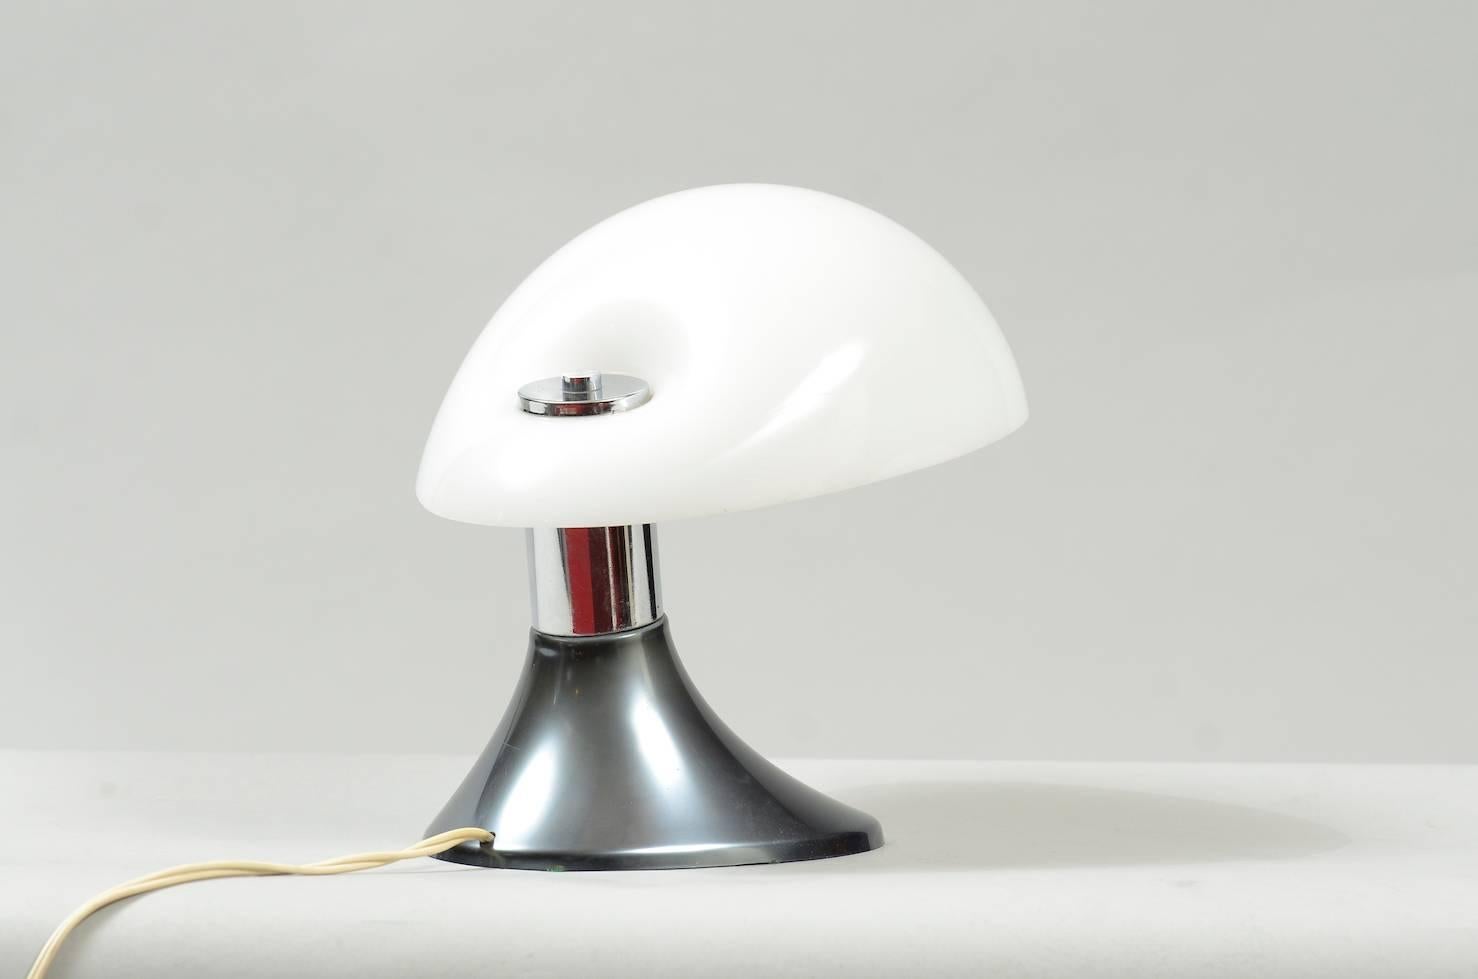 Mid-Century Modern French Table Lamp